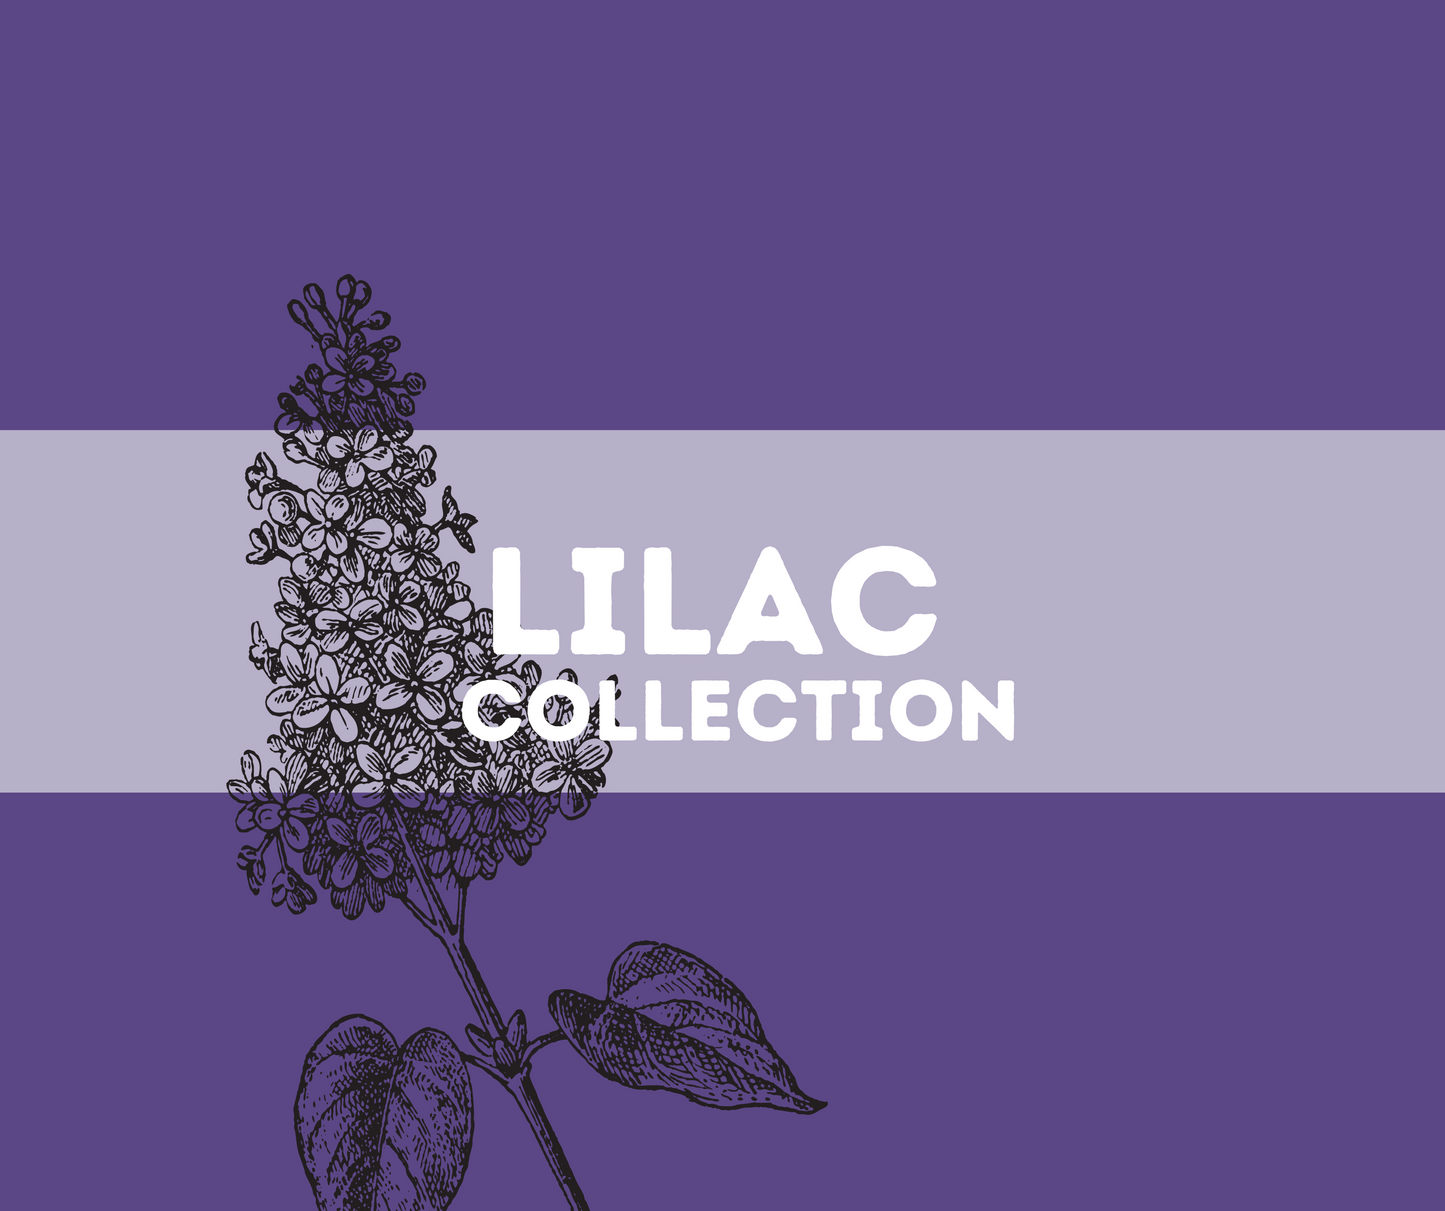 LILAC COLLECTION